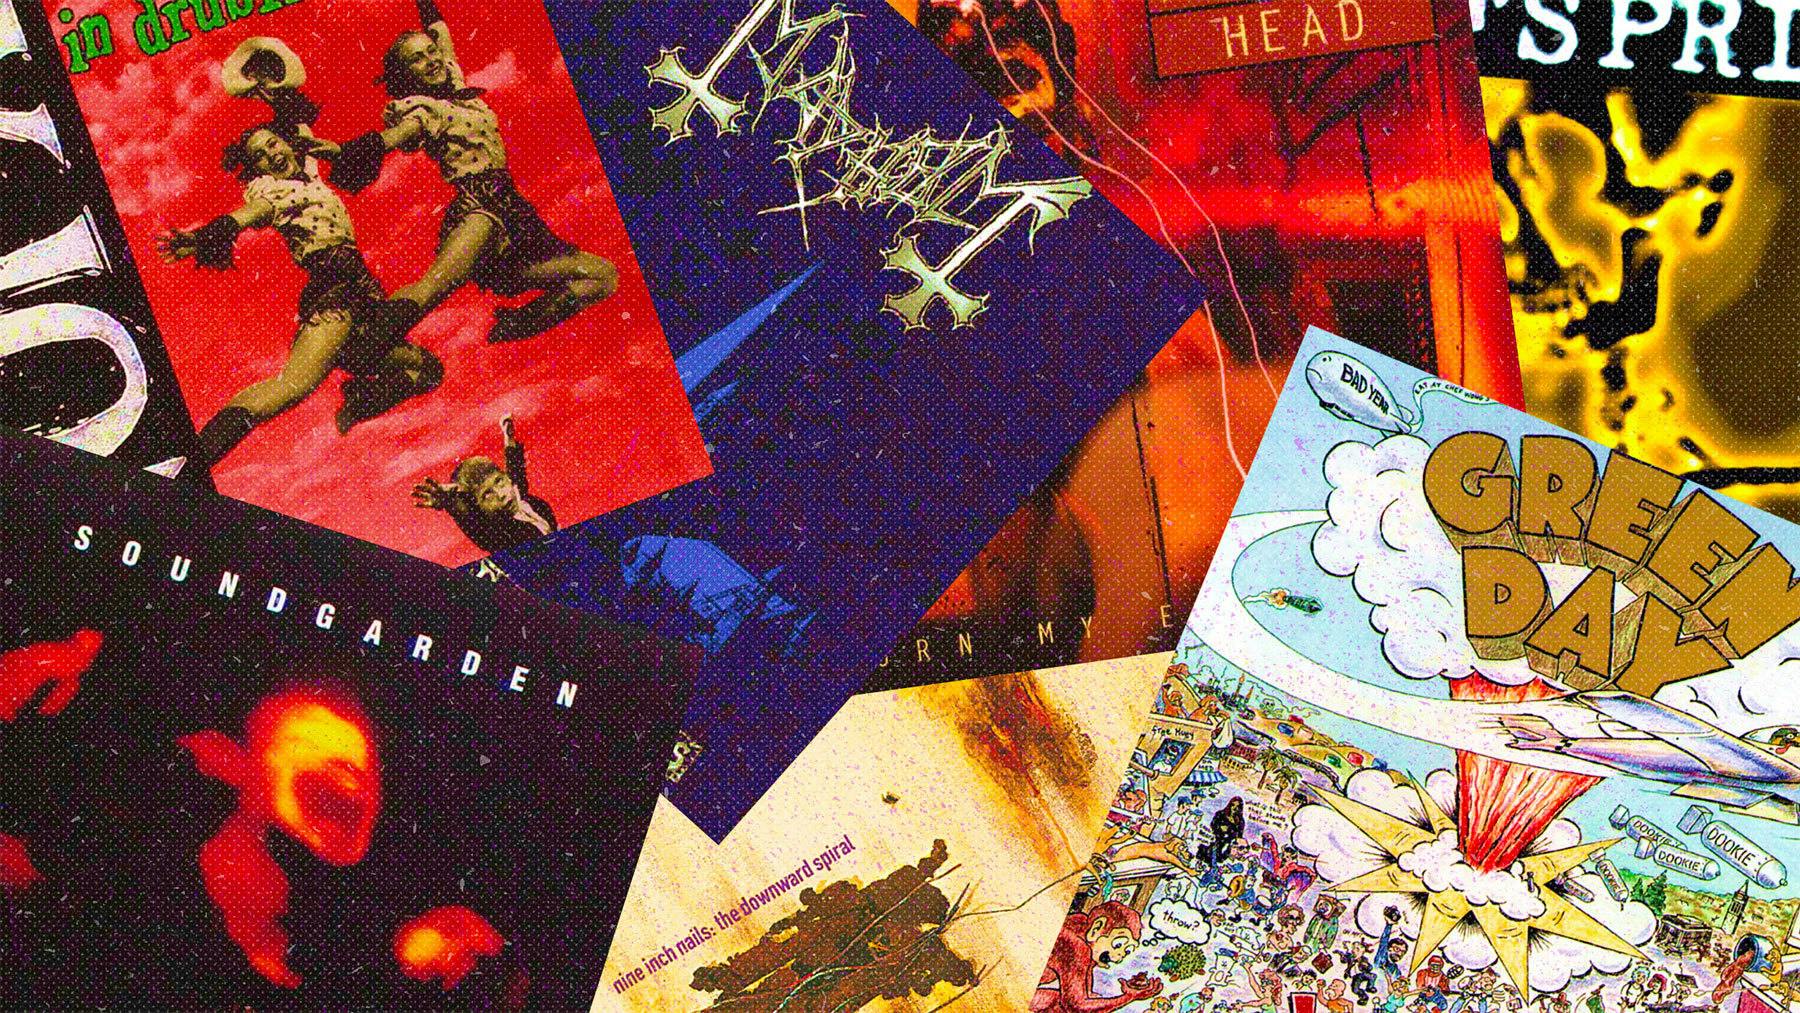 How 1994 changed rock music forever